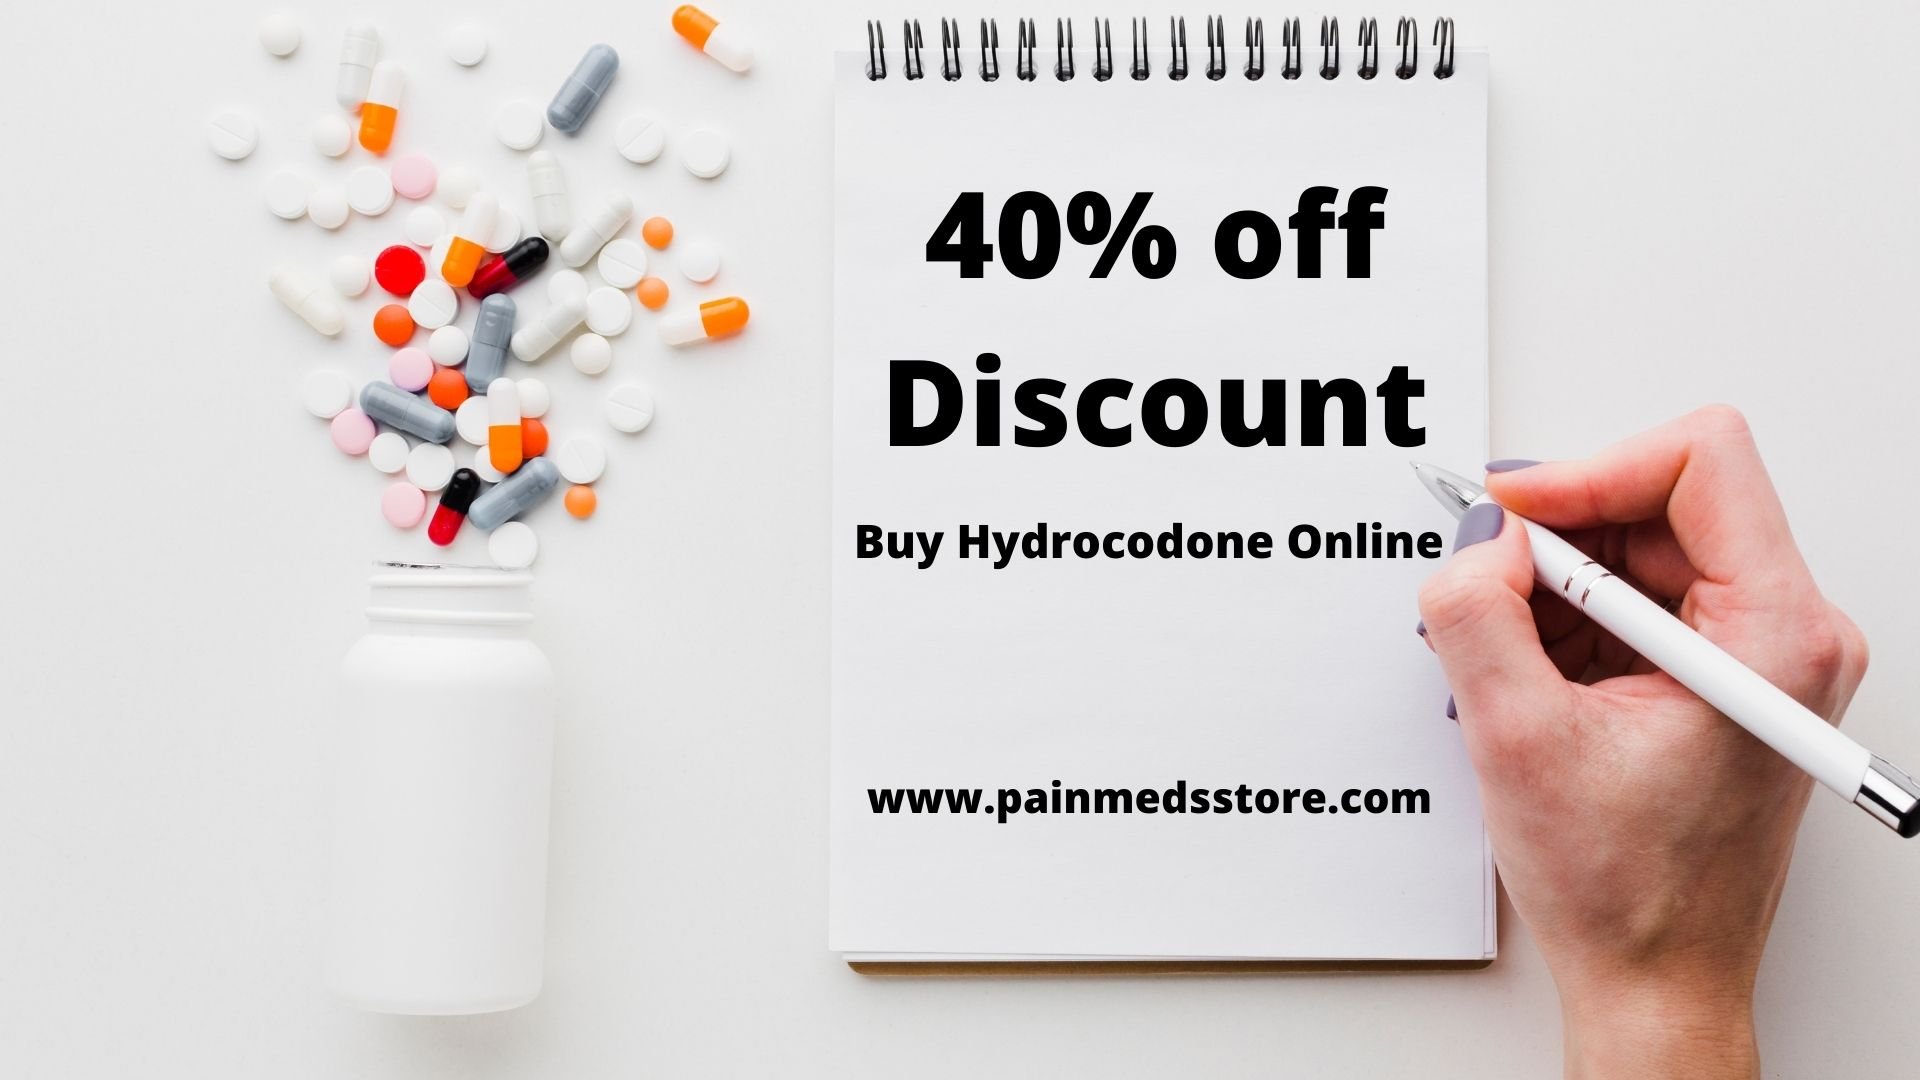 Buy hydrocodone online from painmedsstore.com cover